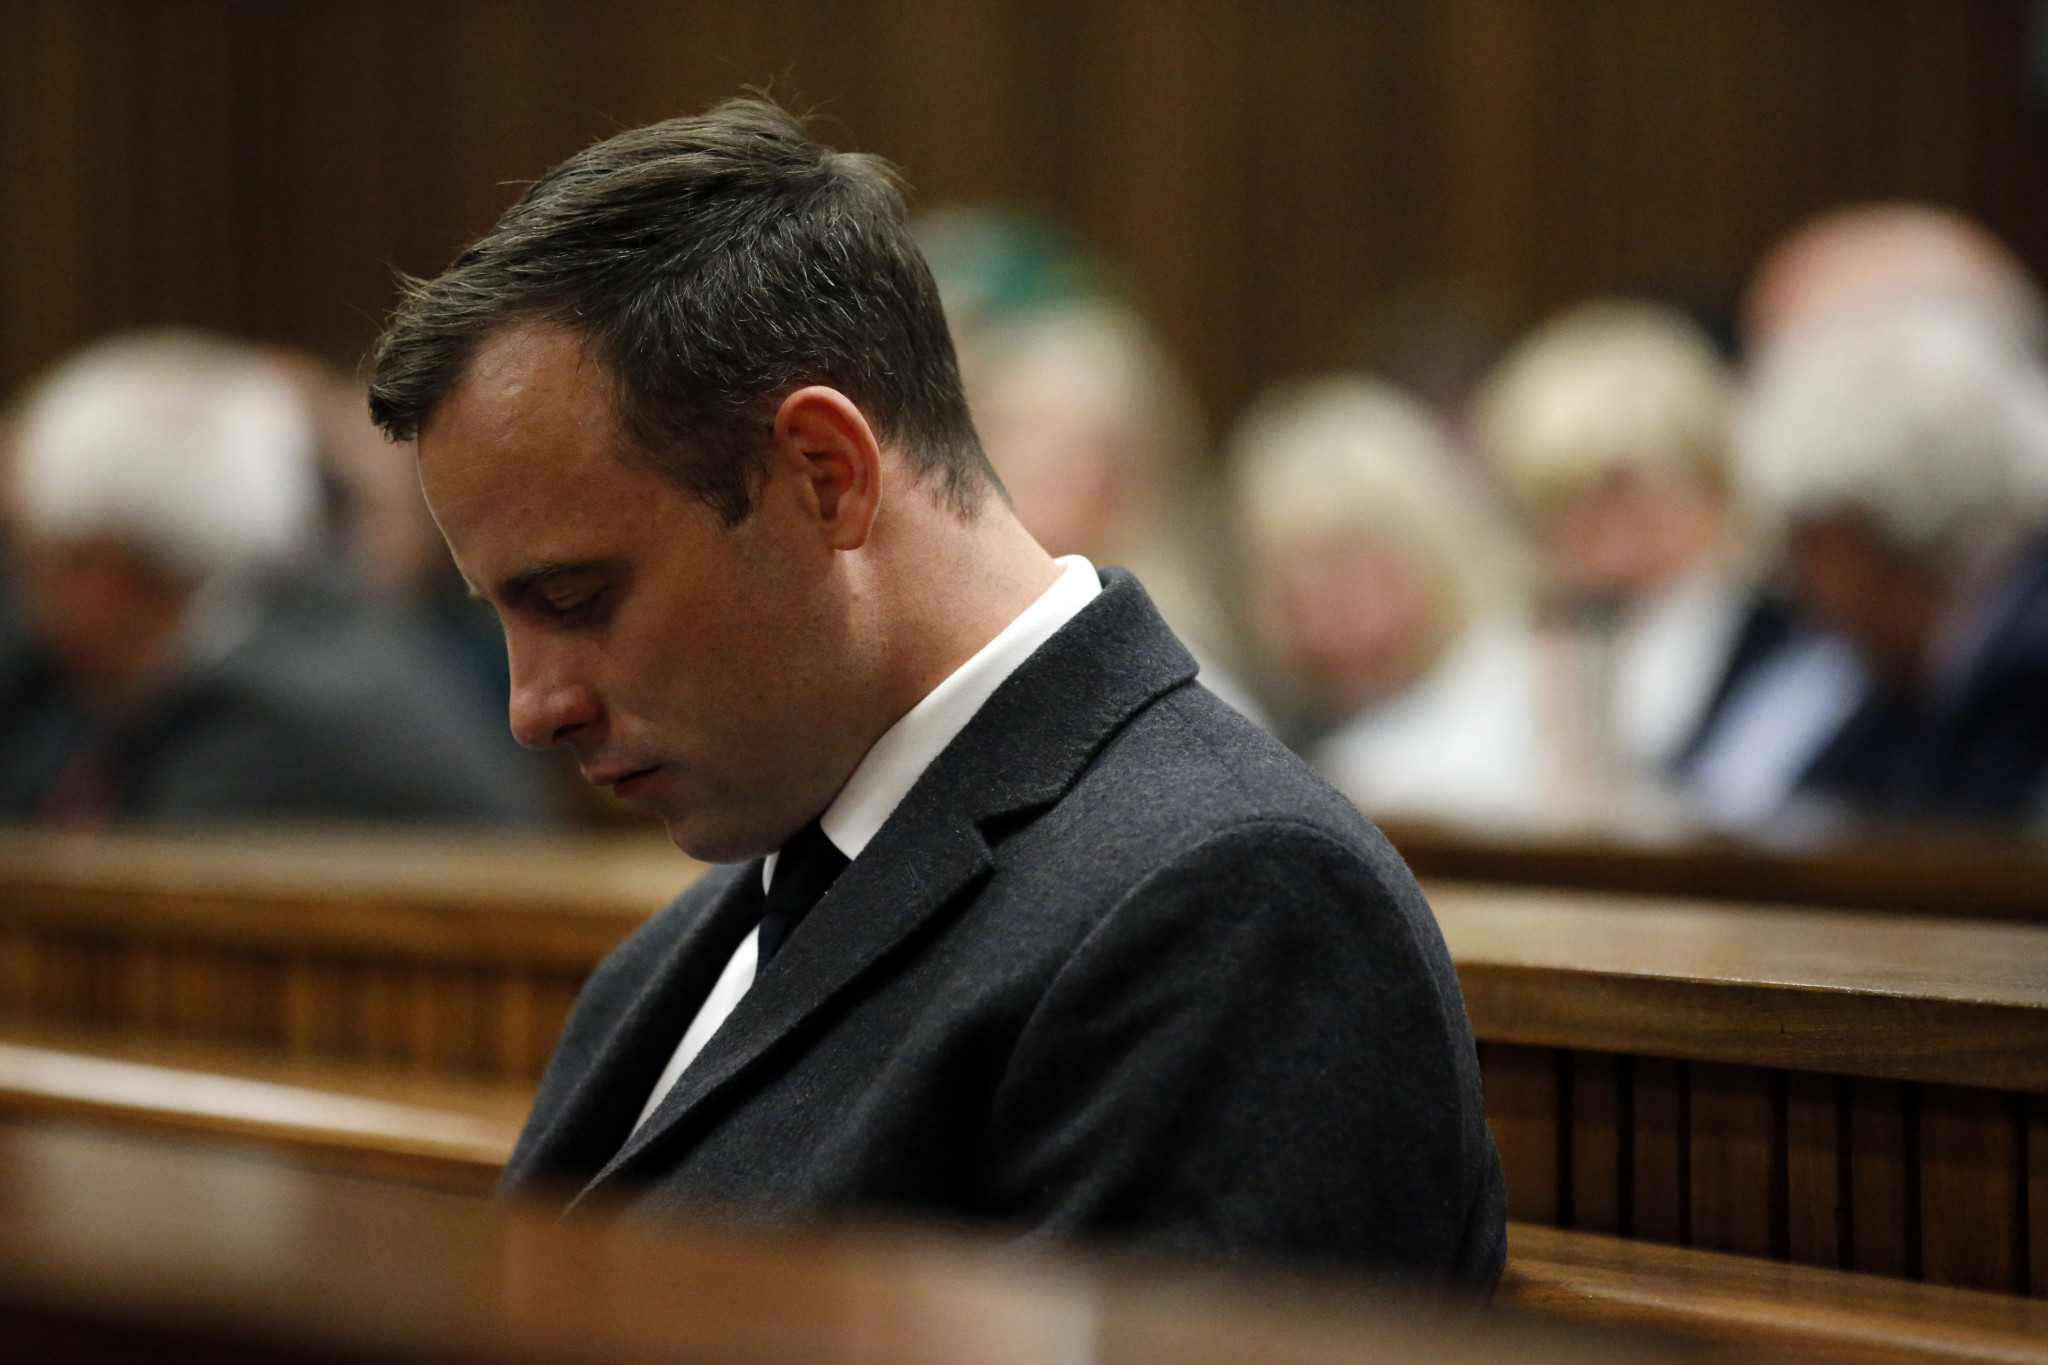 Six-time Paralympic Games gold medallist Oscar Pistorius has been moved to a jail near the parents of the girlfriend he murdered as part of his preparations to be released on parole ©Getty Images